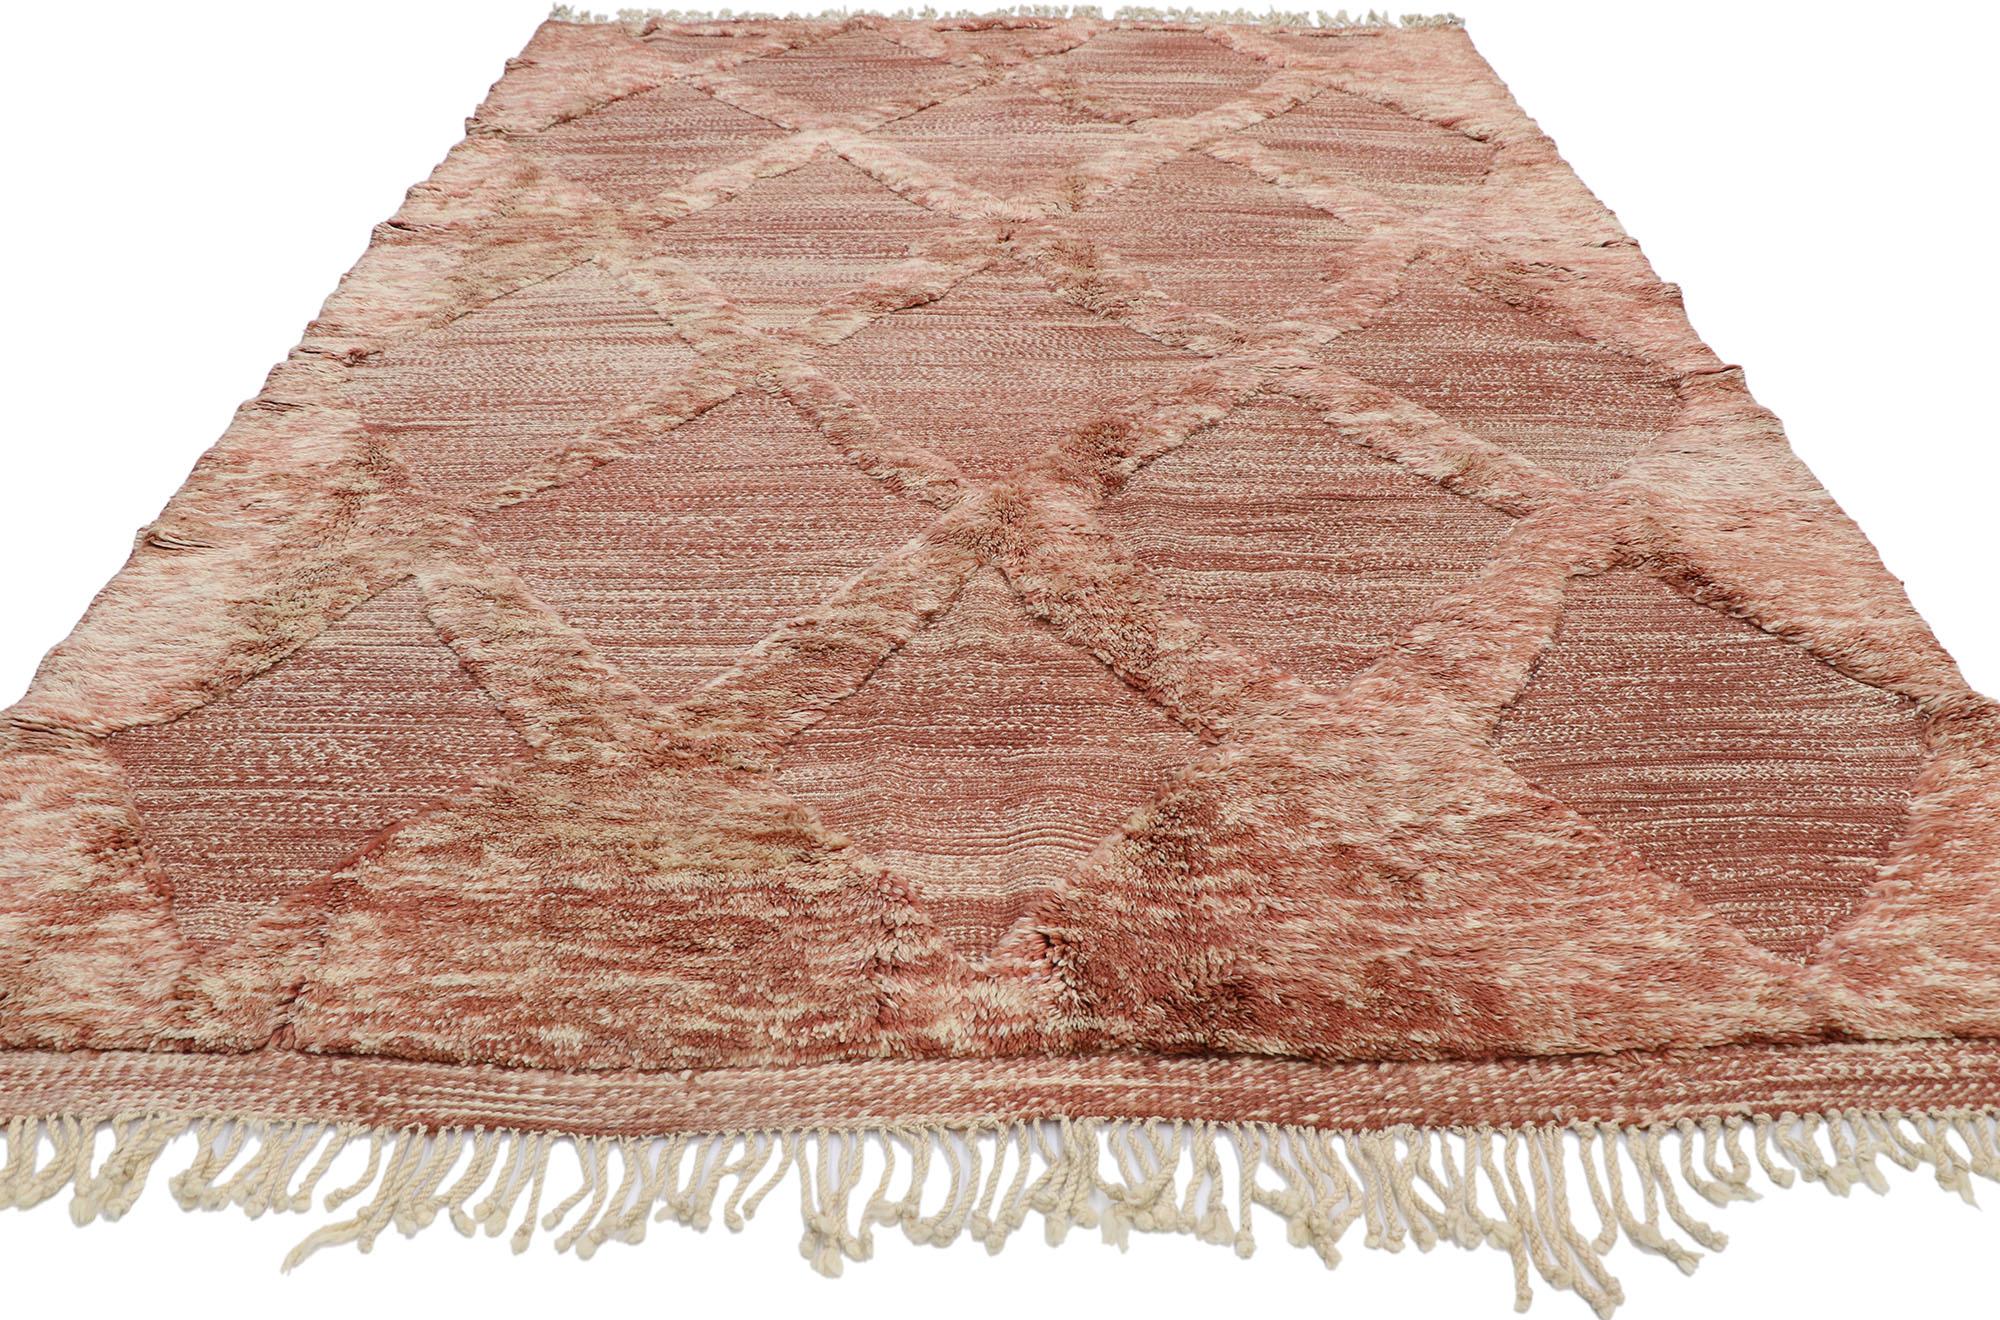 Tribal New Contemporary Berber Moroccan Souf Kilim Rug with Rustic Boho Style For Sale